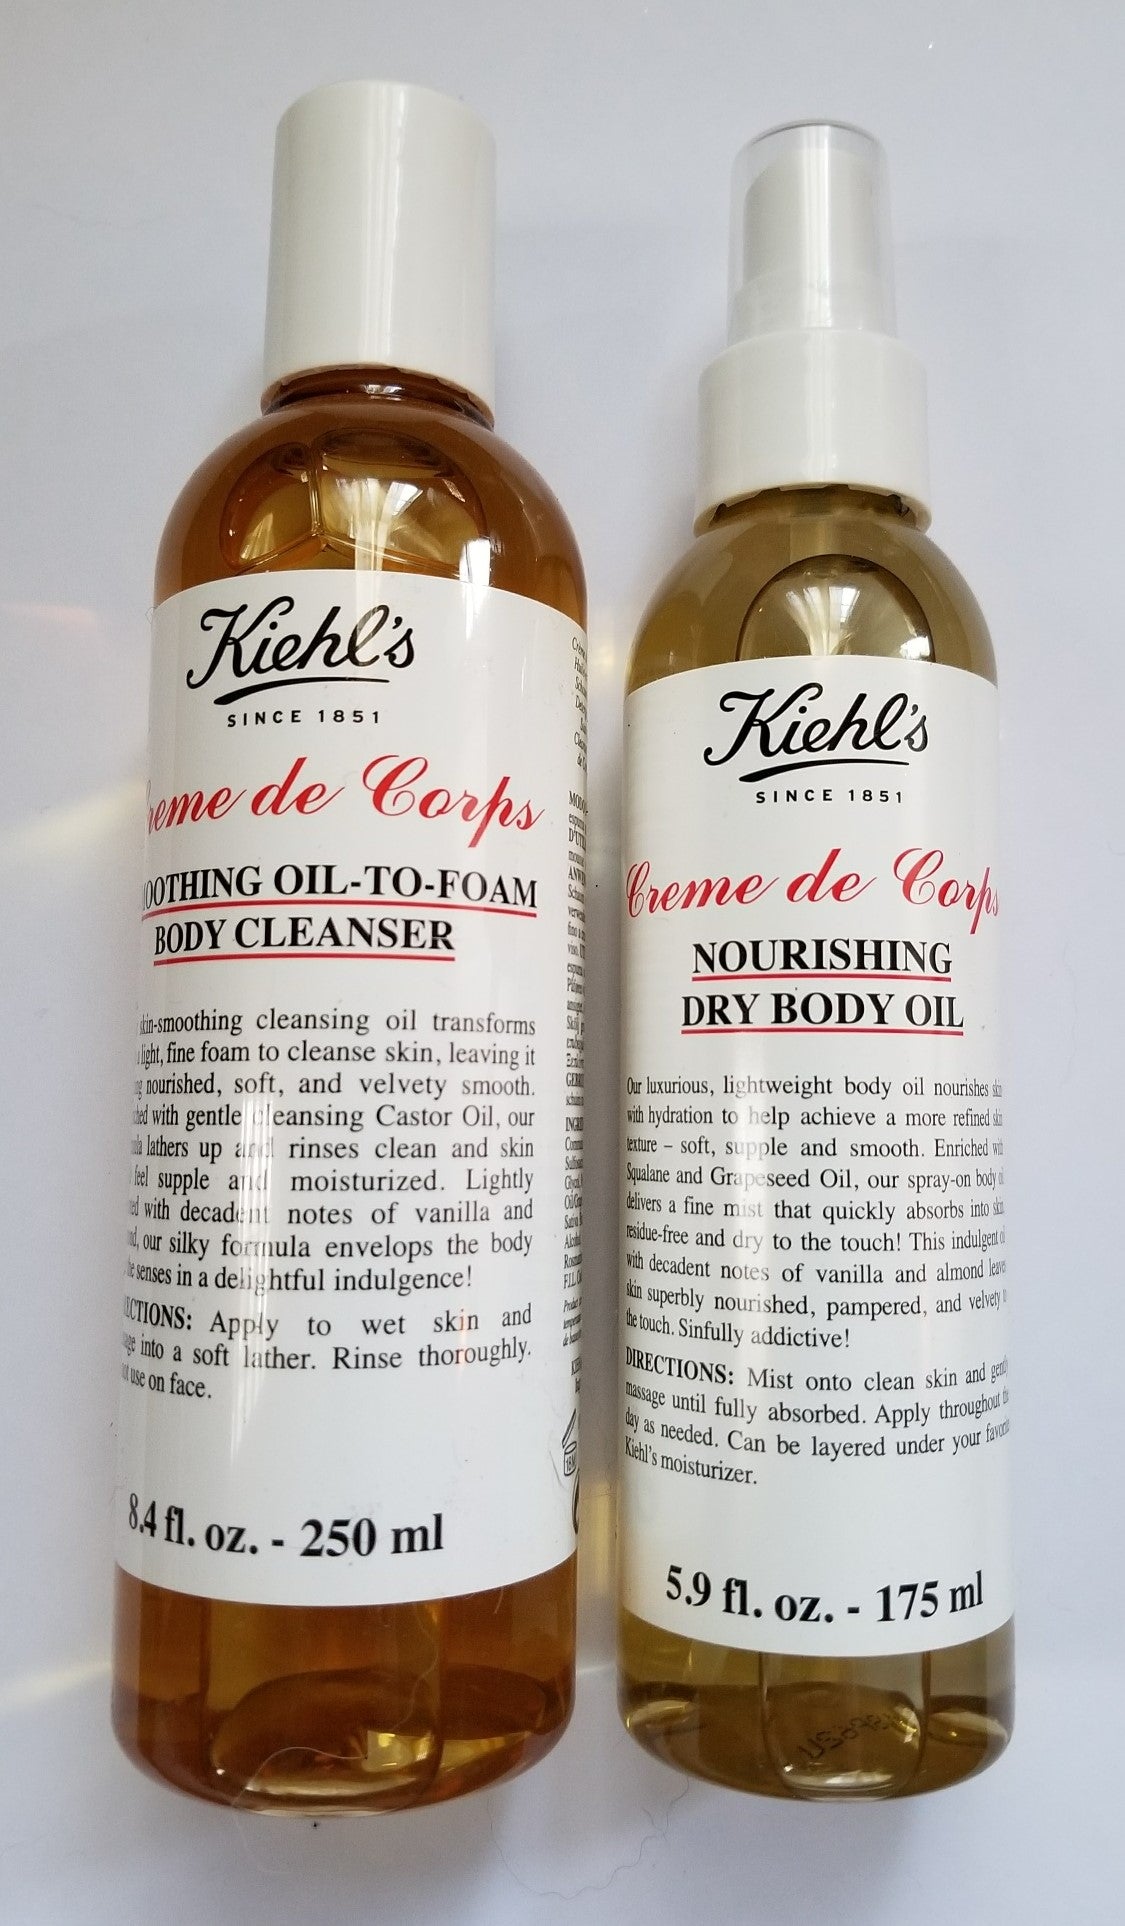 Review, Ingredients, Photos, Swatches, Skincare Trend 2017, 2018: Kiehl's Creme de Corps Smoothing Oil to Foam Body Cleanser, Creme de Corps Nourishing Dry Body Oil, Dry Skin, Moisturizer, Body Butter, Winter